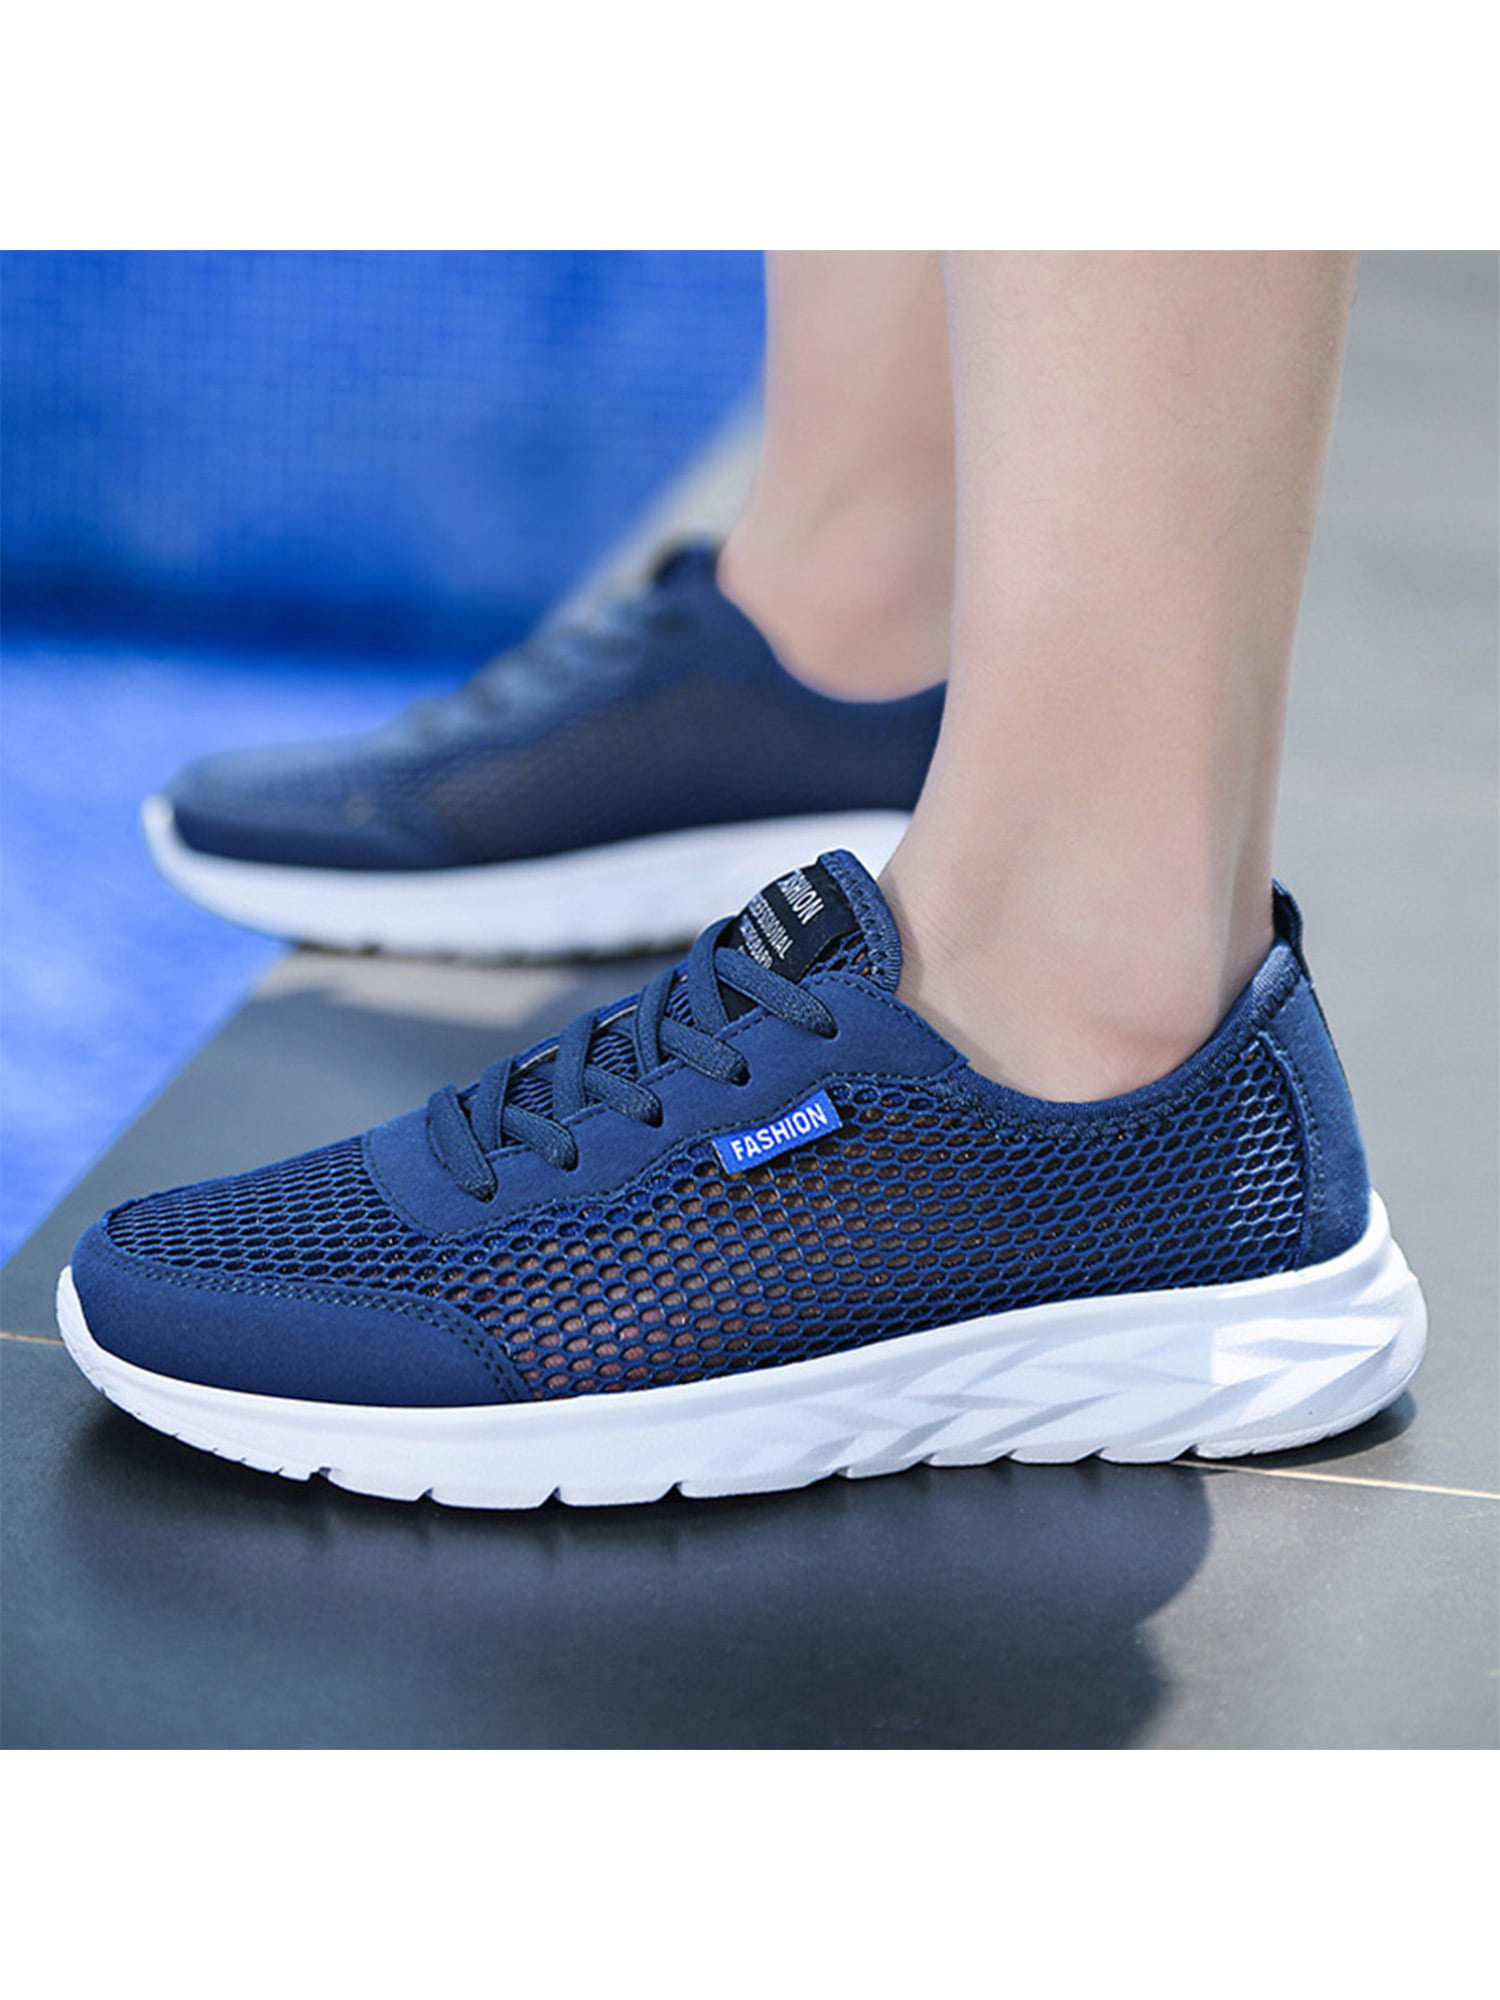 Mens Mesh Trainers Low-Top Lace-Up Running Trainers Athletic Walking Gym Shoes Fashion Sport Tourist Shoes Lightweight Air Cushion Breathable Basketball Sneakers Mens Mesh Shoes 